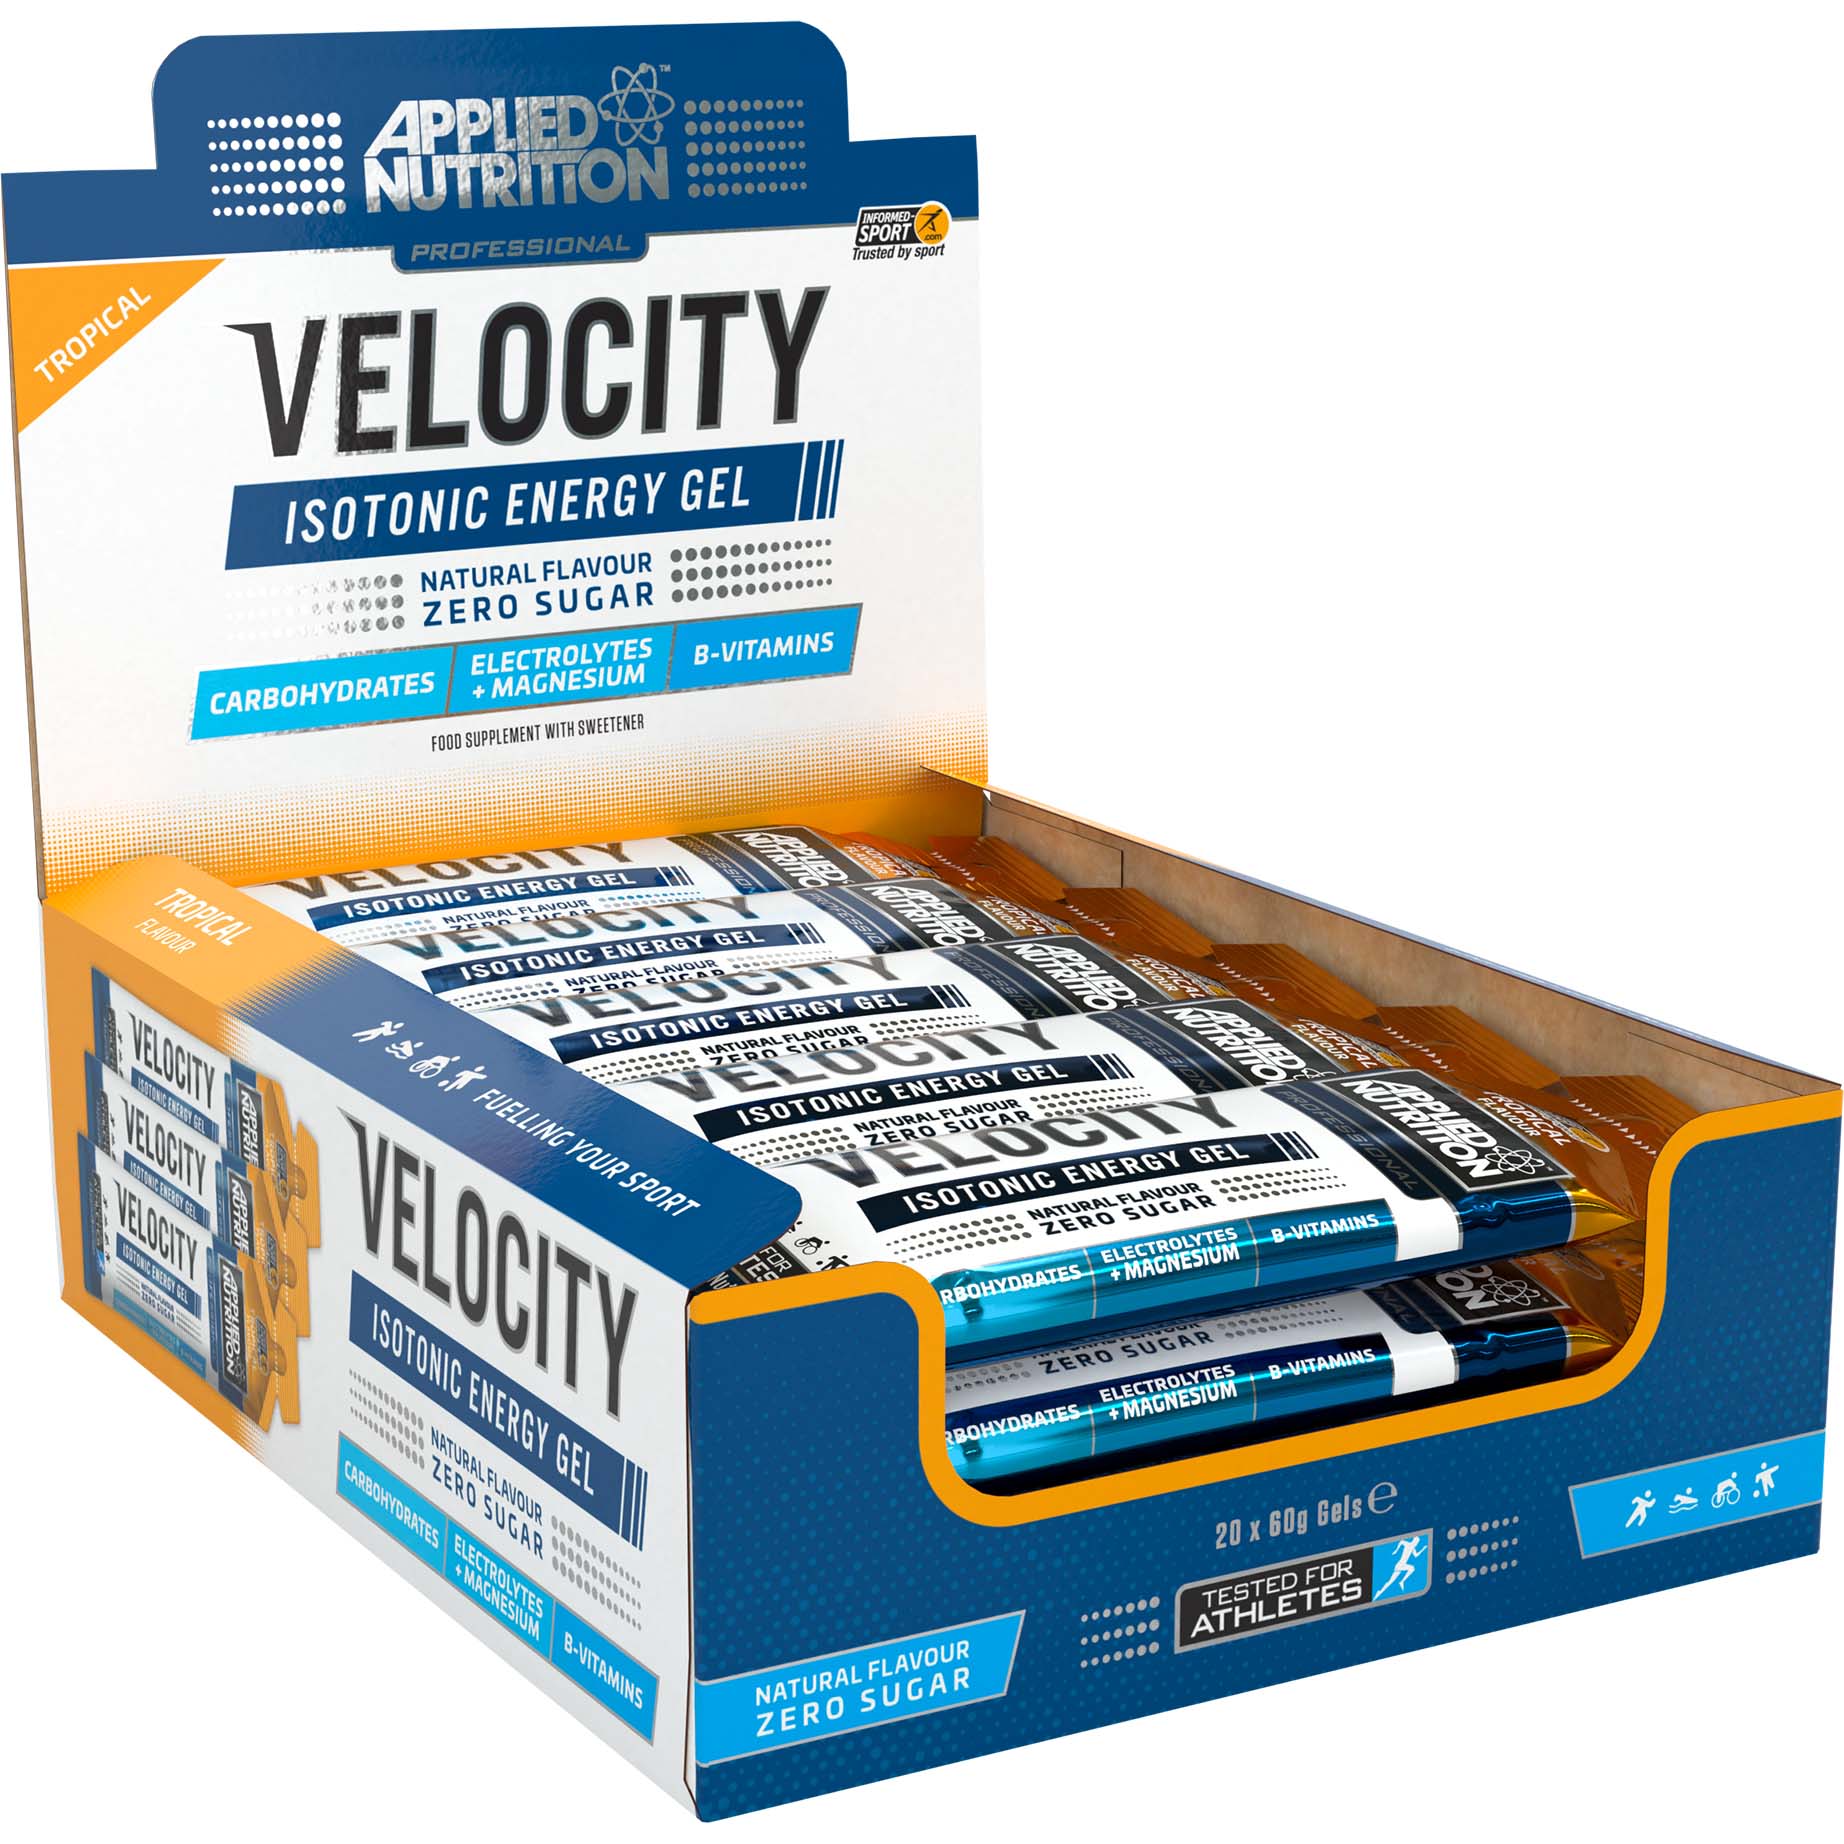 Applied Nutrition Velocity Isotonic Energy Gel, Tropical, Box of 20 Pieces